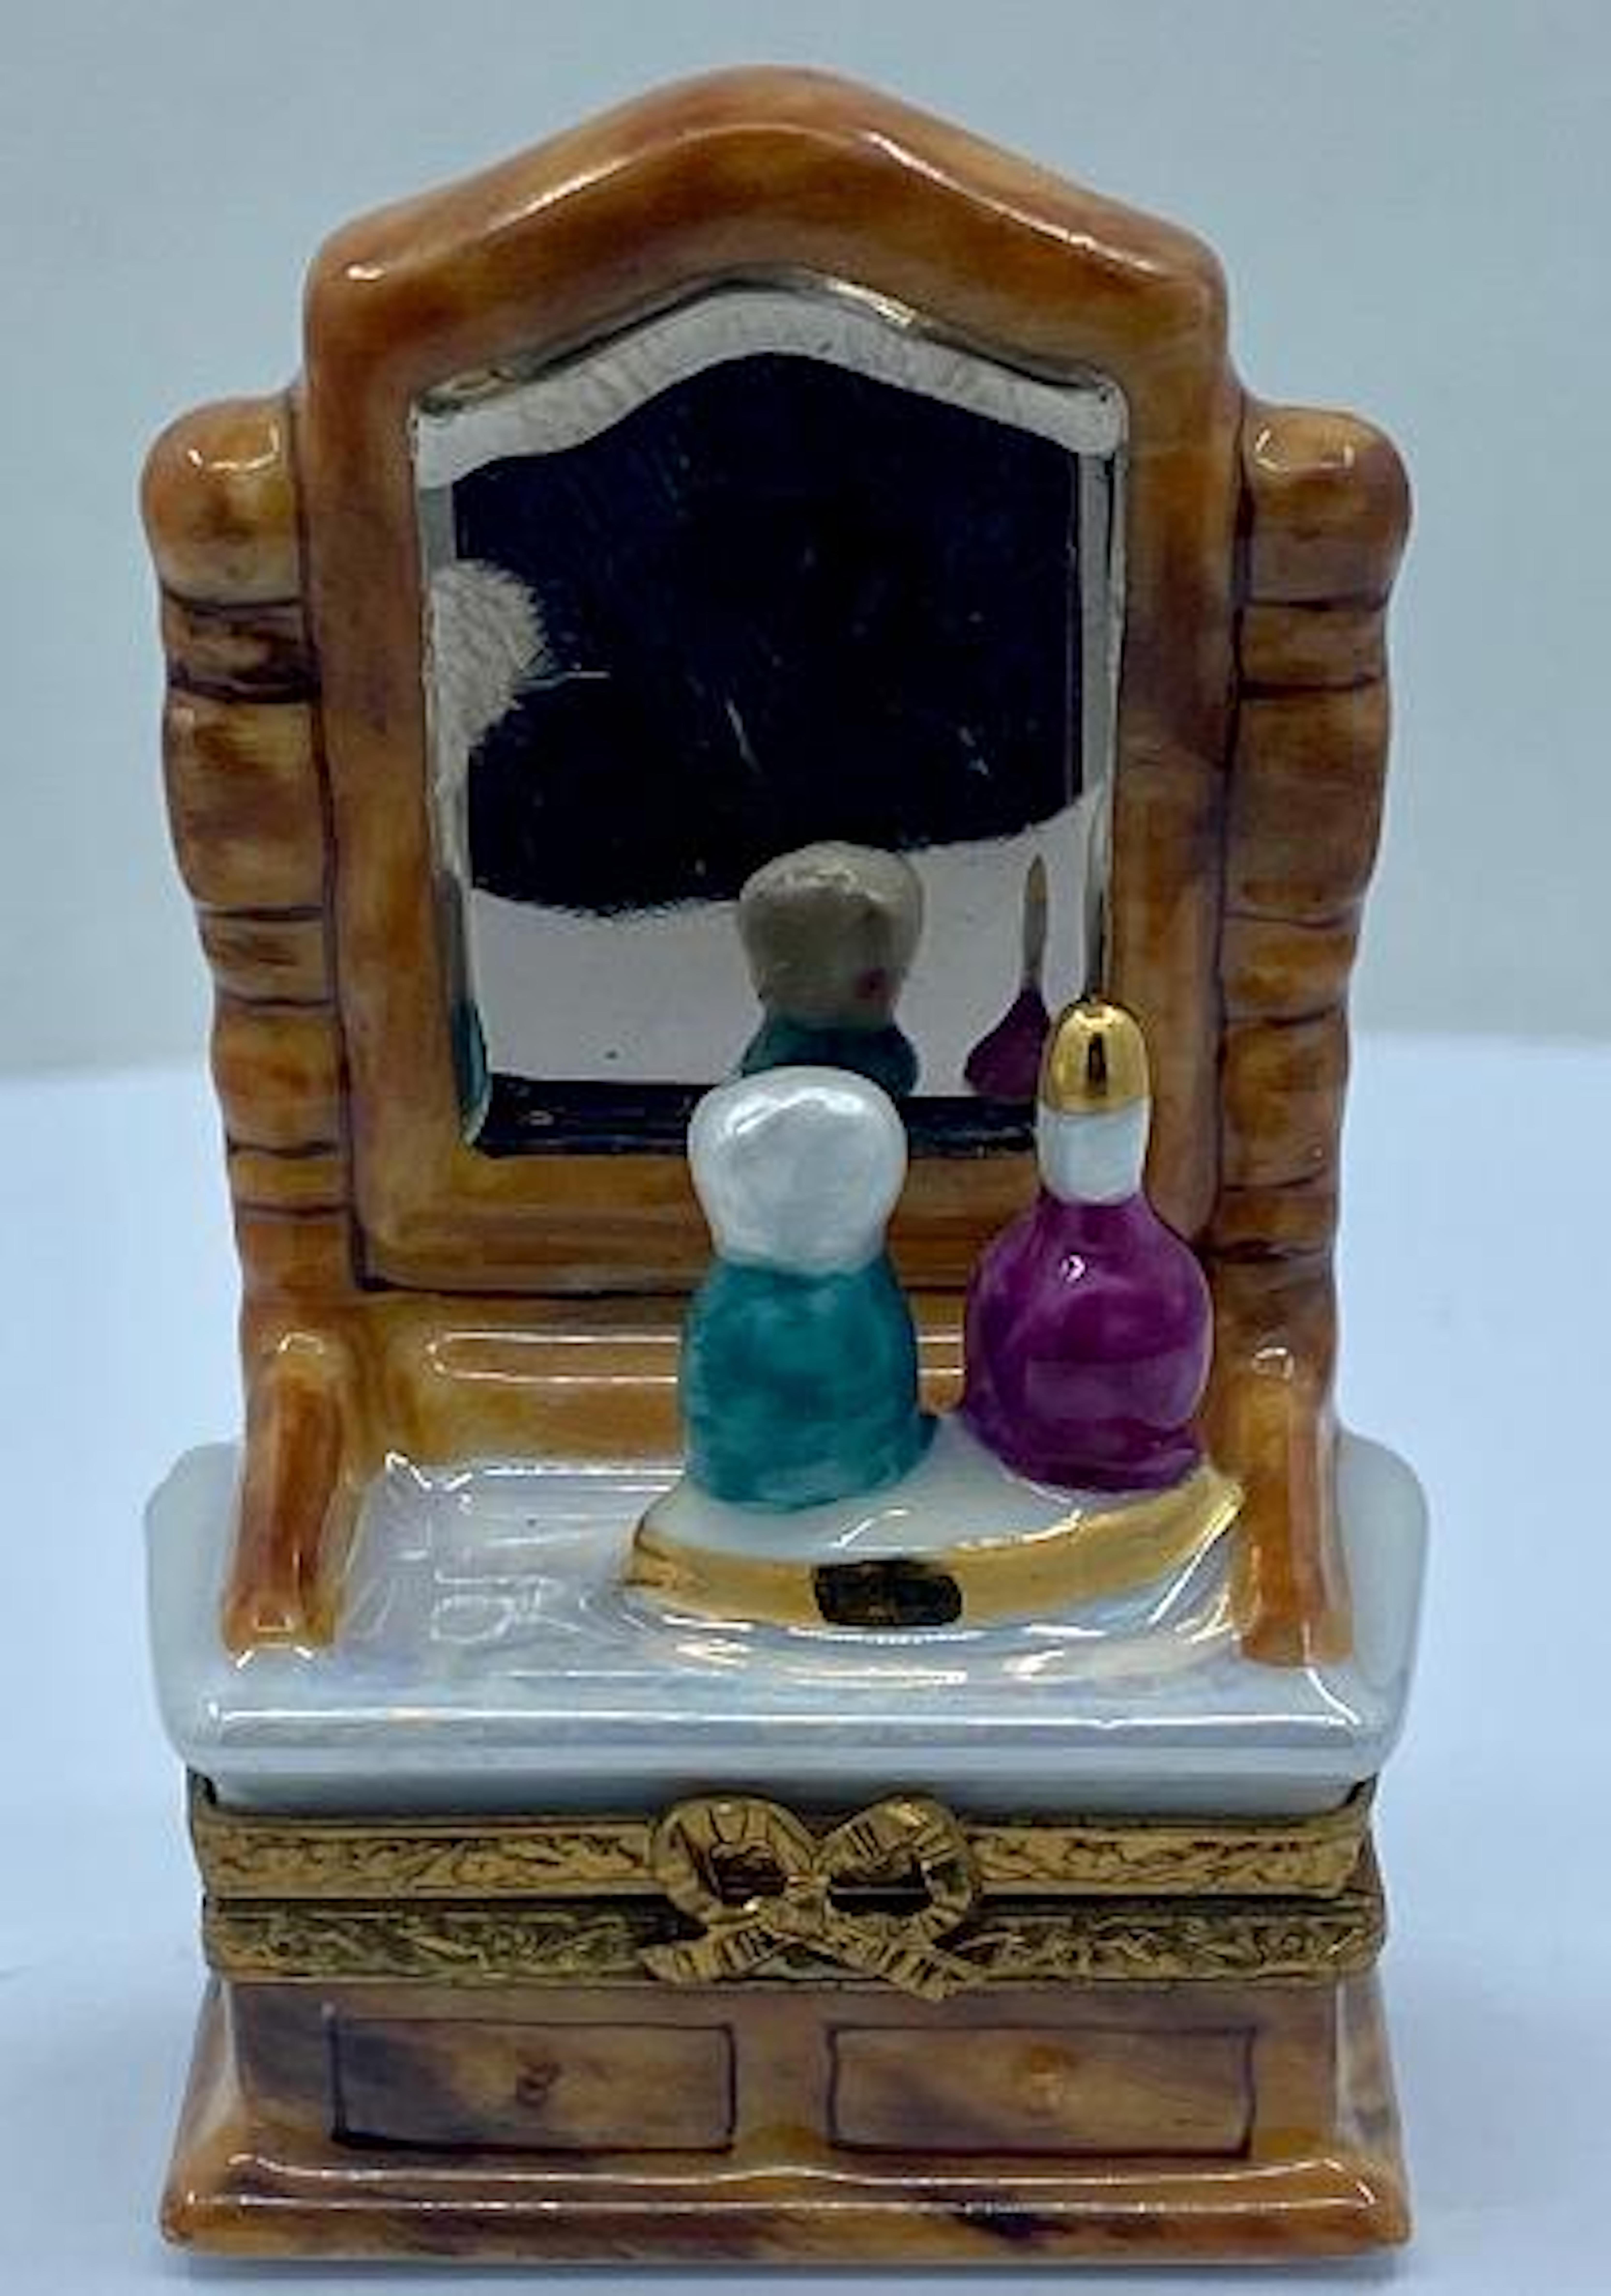 Collectible and very unique, Limoges porcelain miniature trinket box is handmade and hand painted in France and features a very detailed vanity or dresser with attached mirror and a tray on top with perfume bottles. Beautiful wood grain finish,